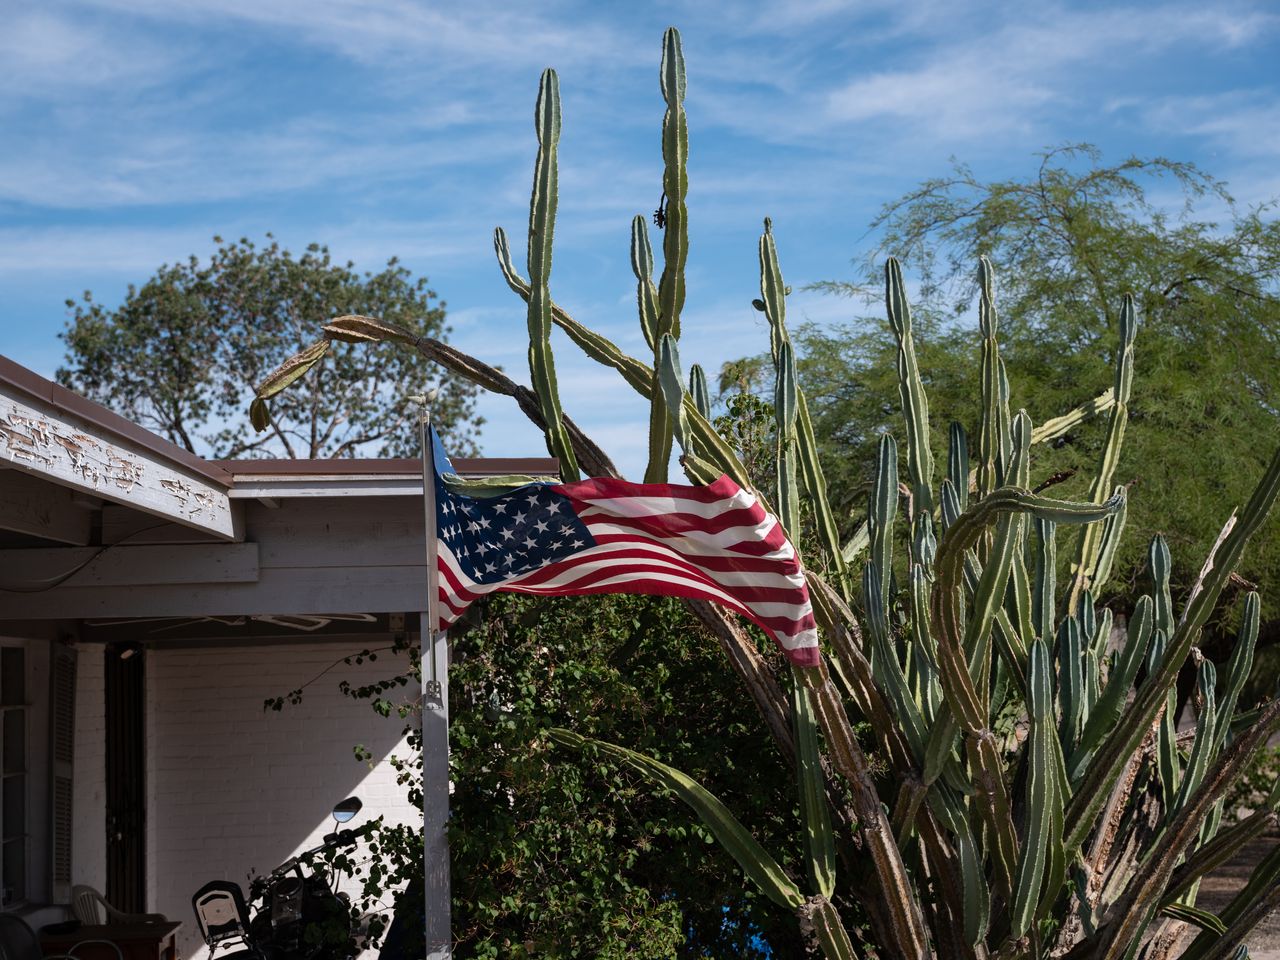 An American flag is caught in the spines of a cactus outside a home in Phoenix.